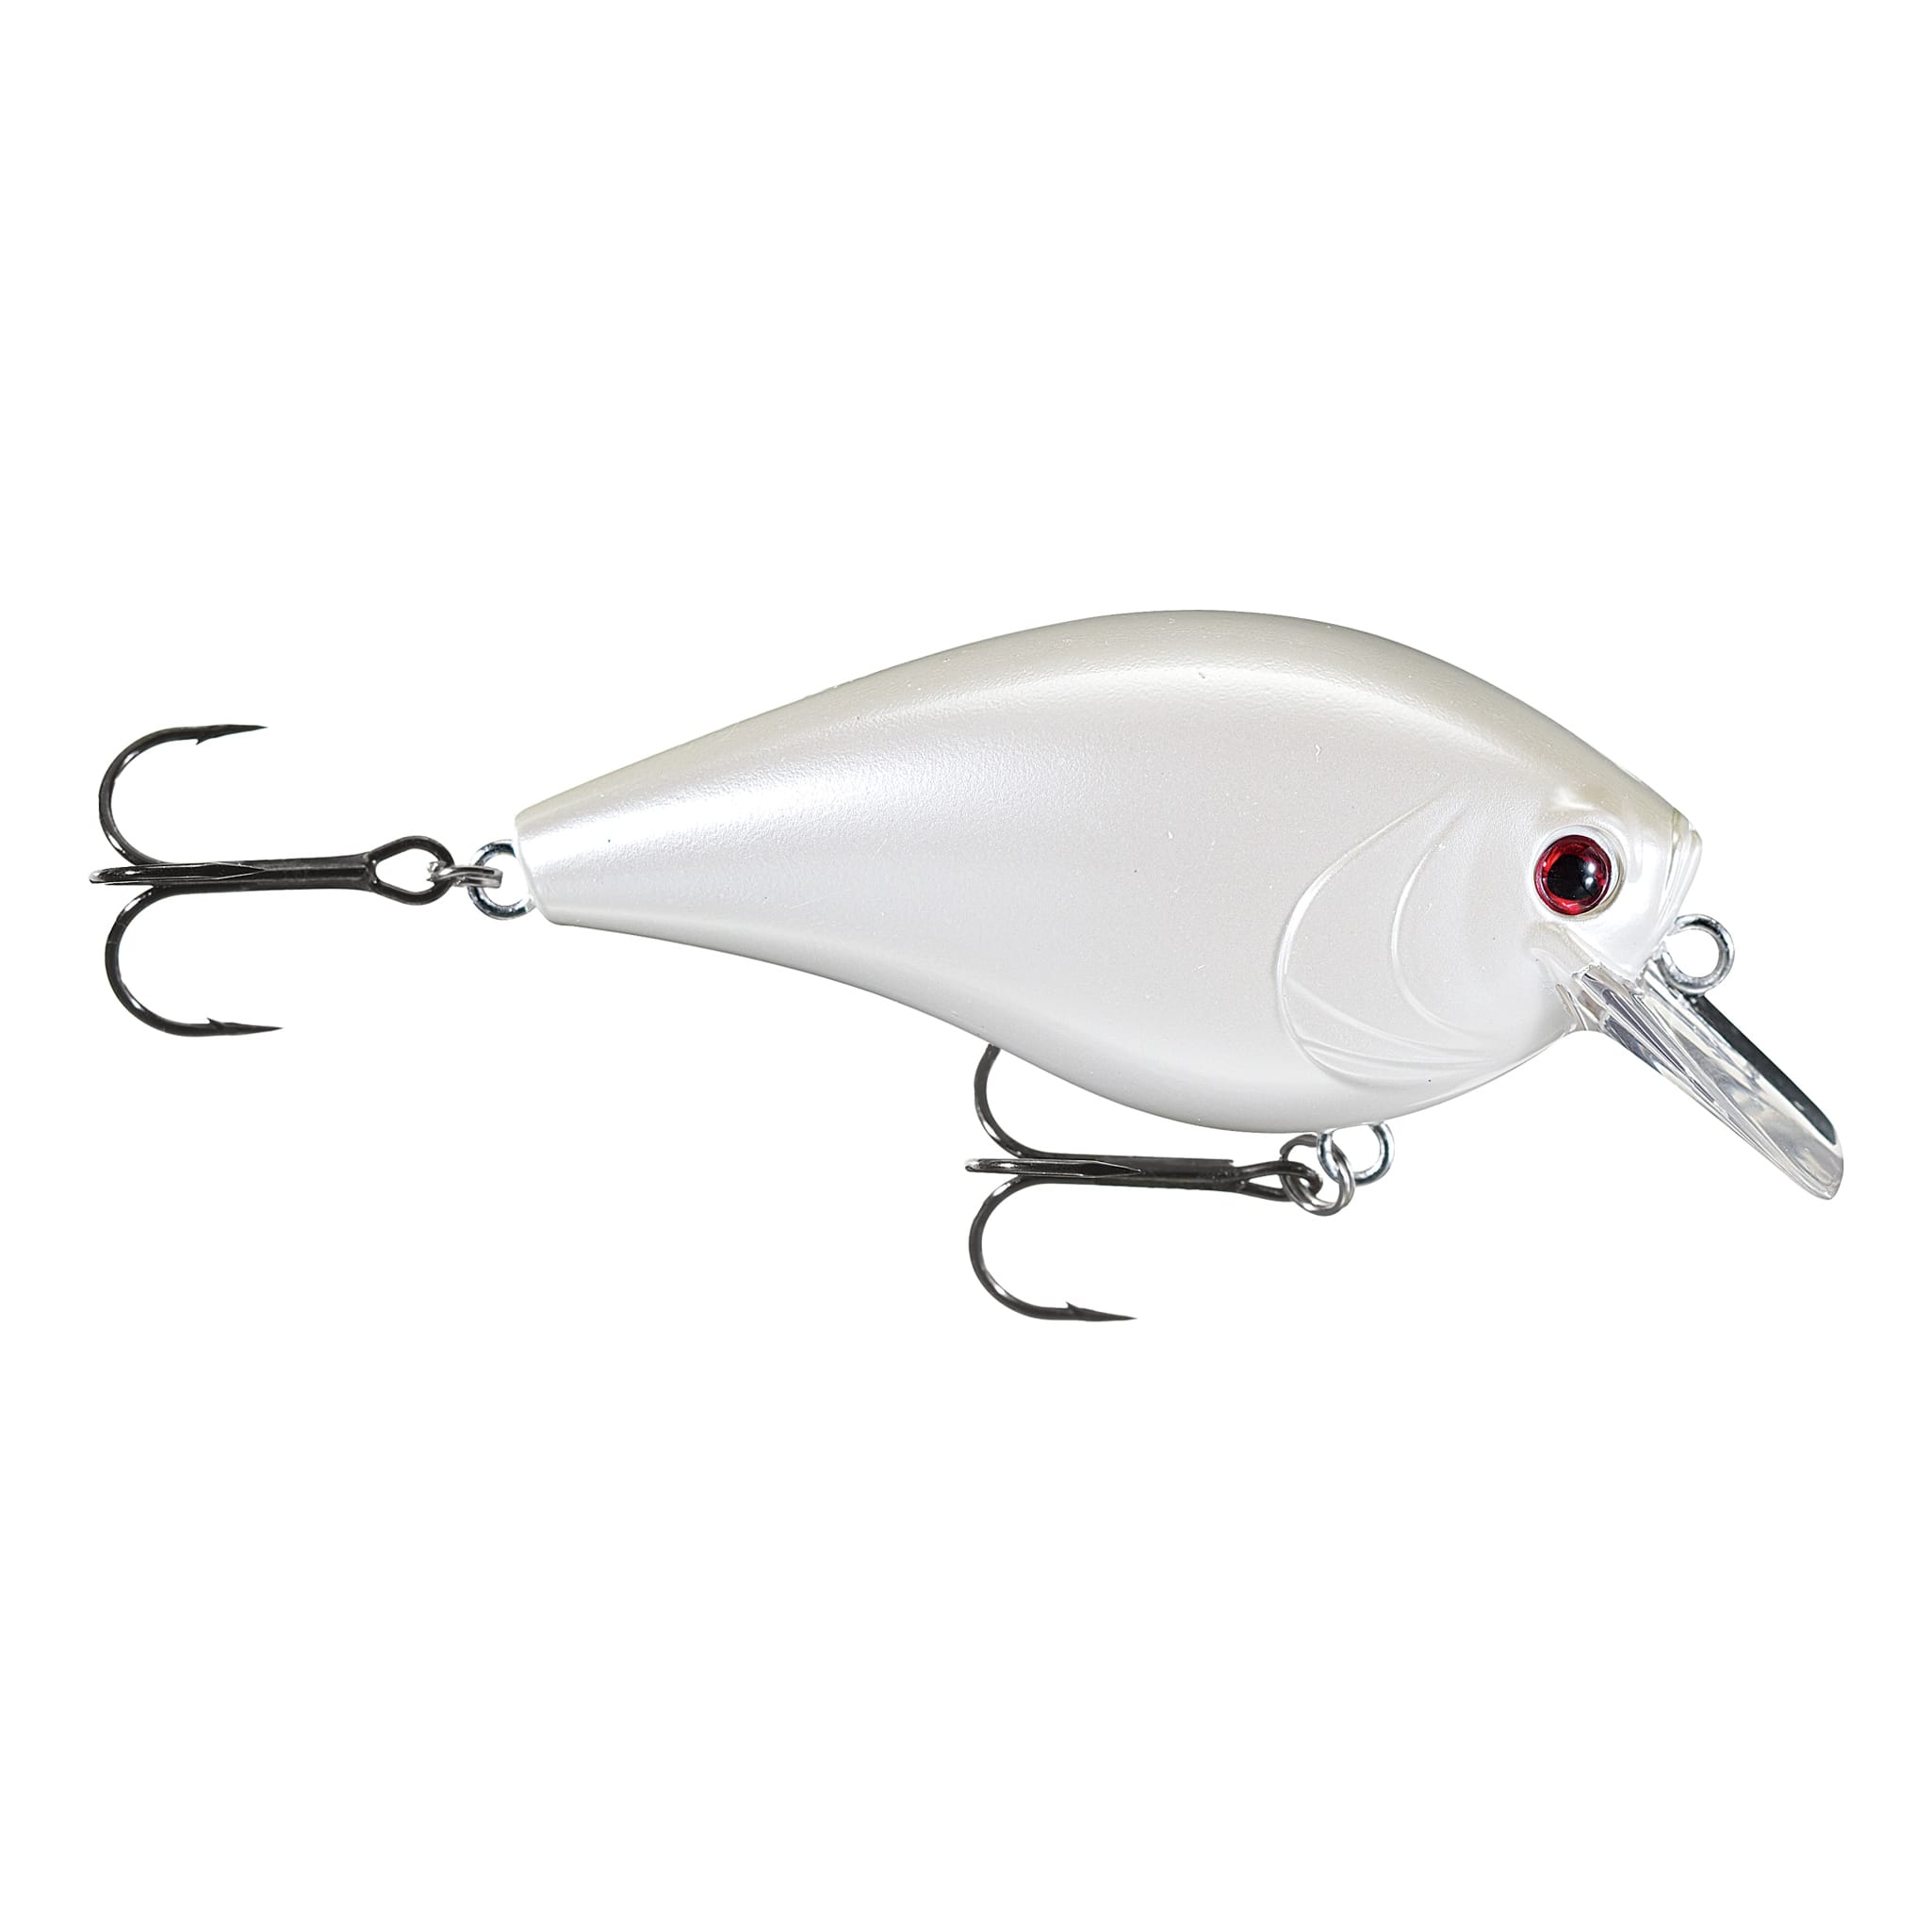 Bass Pro Shops® XPS Square Bill Crankbait - Pearl Red Eye